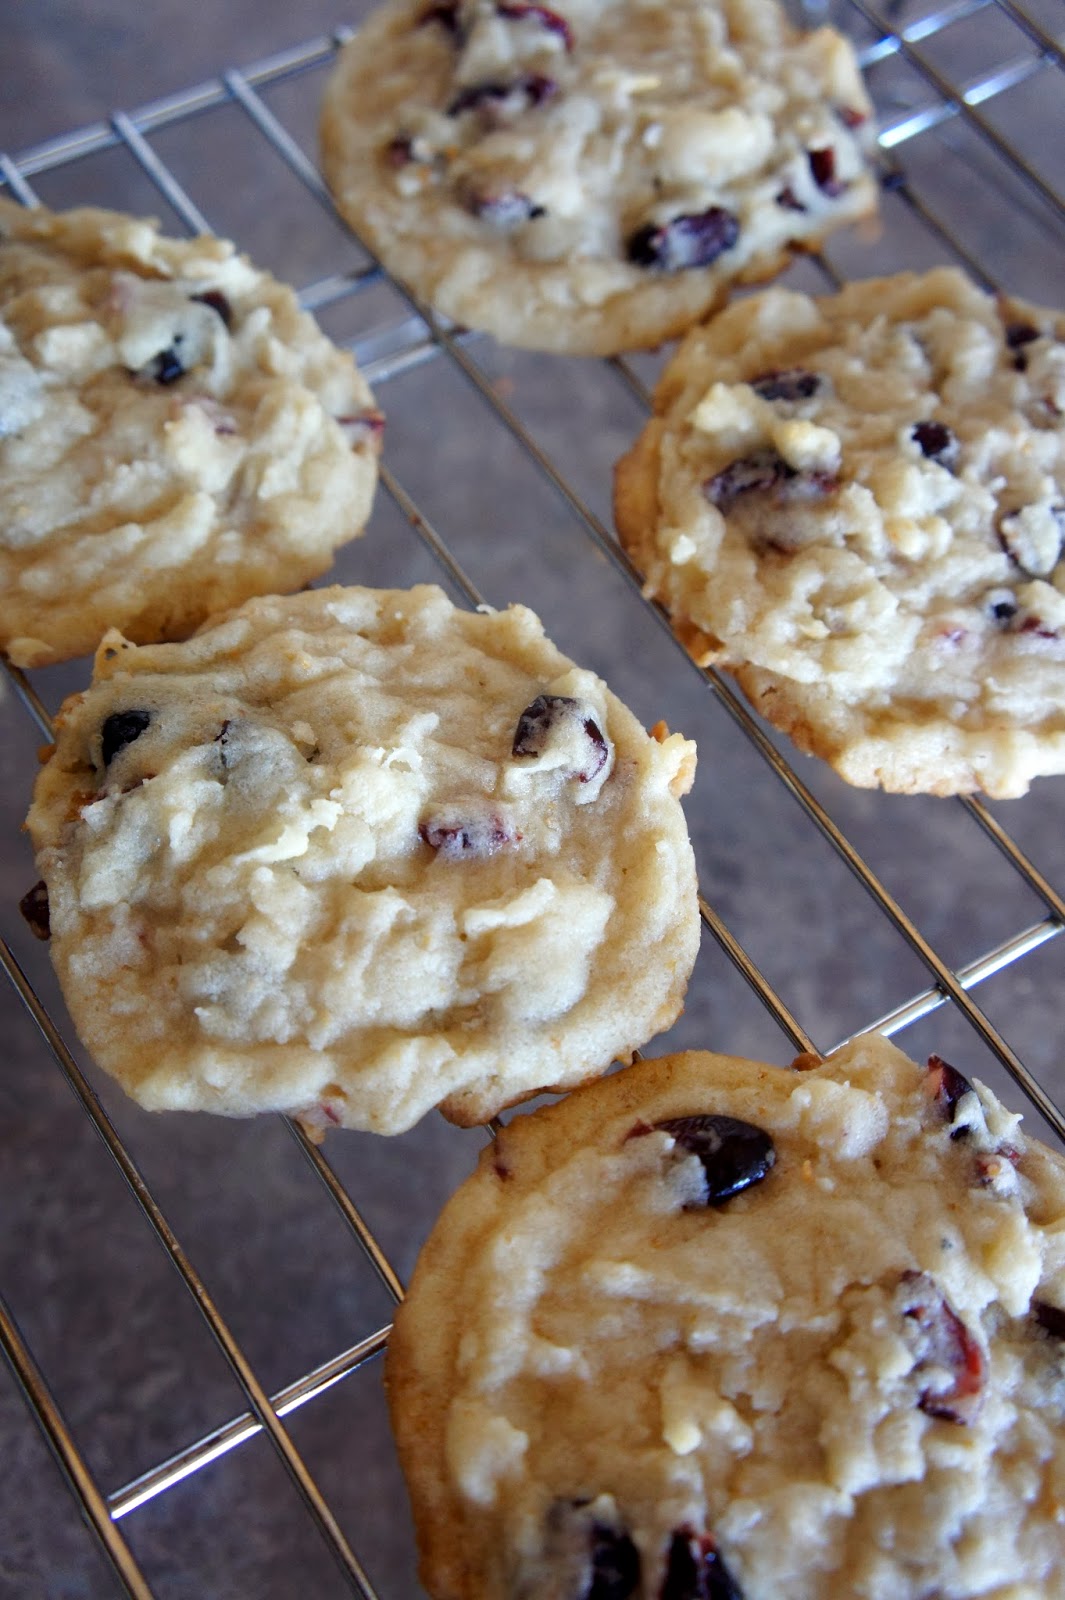 Savory Sweet and Satisfying: Coconut Cranberry Cookies